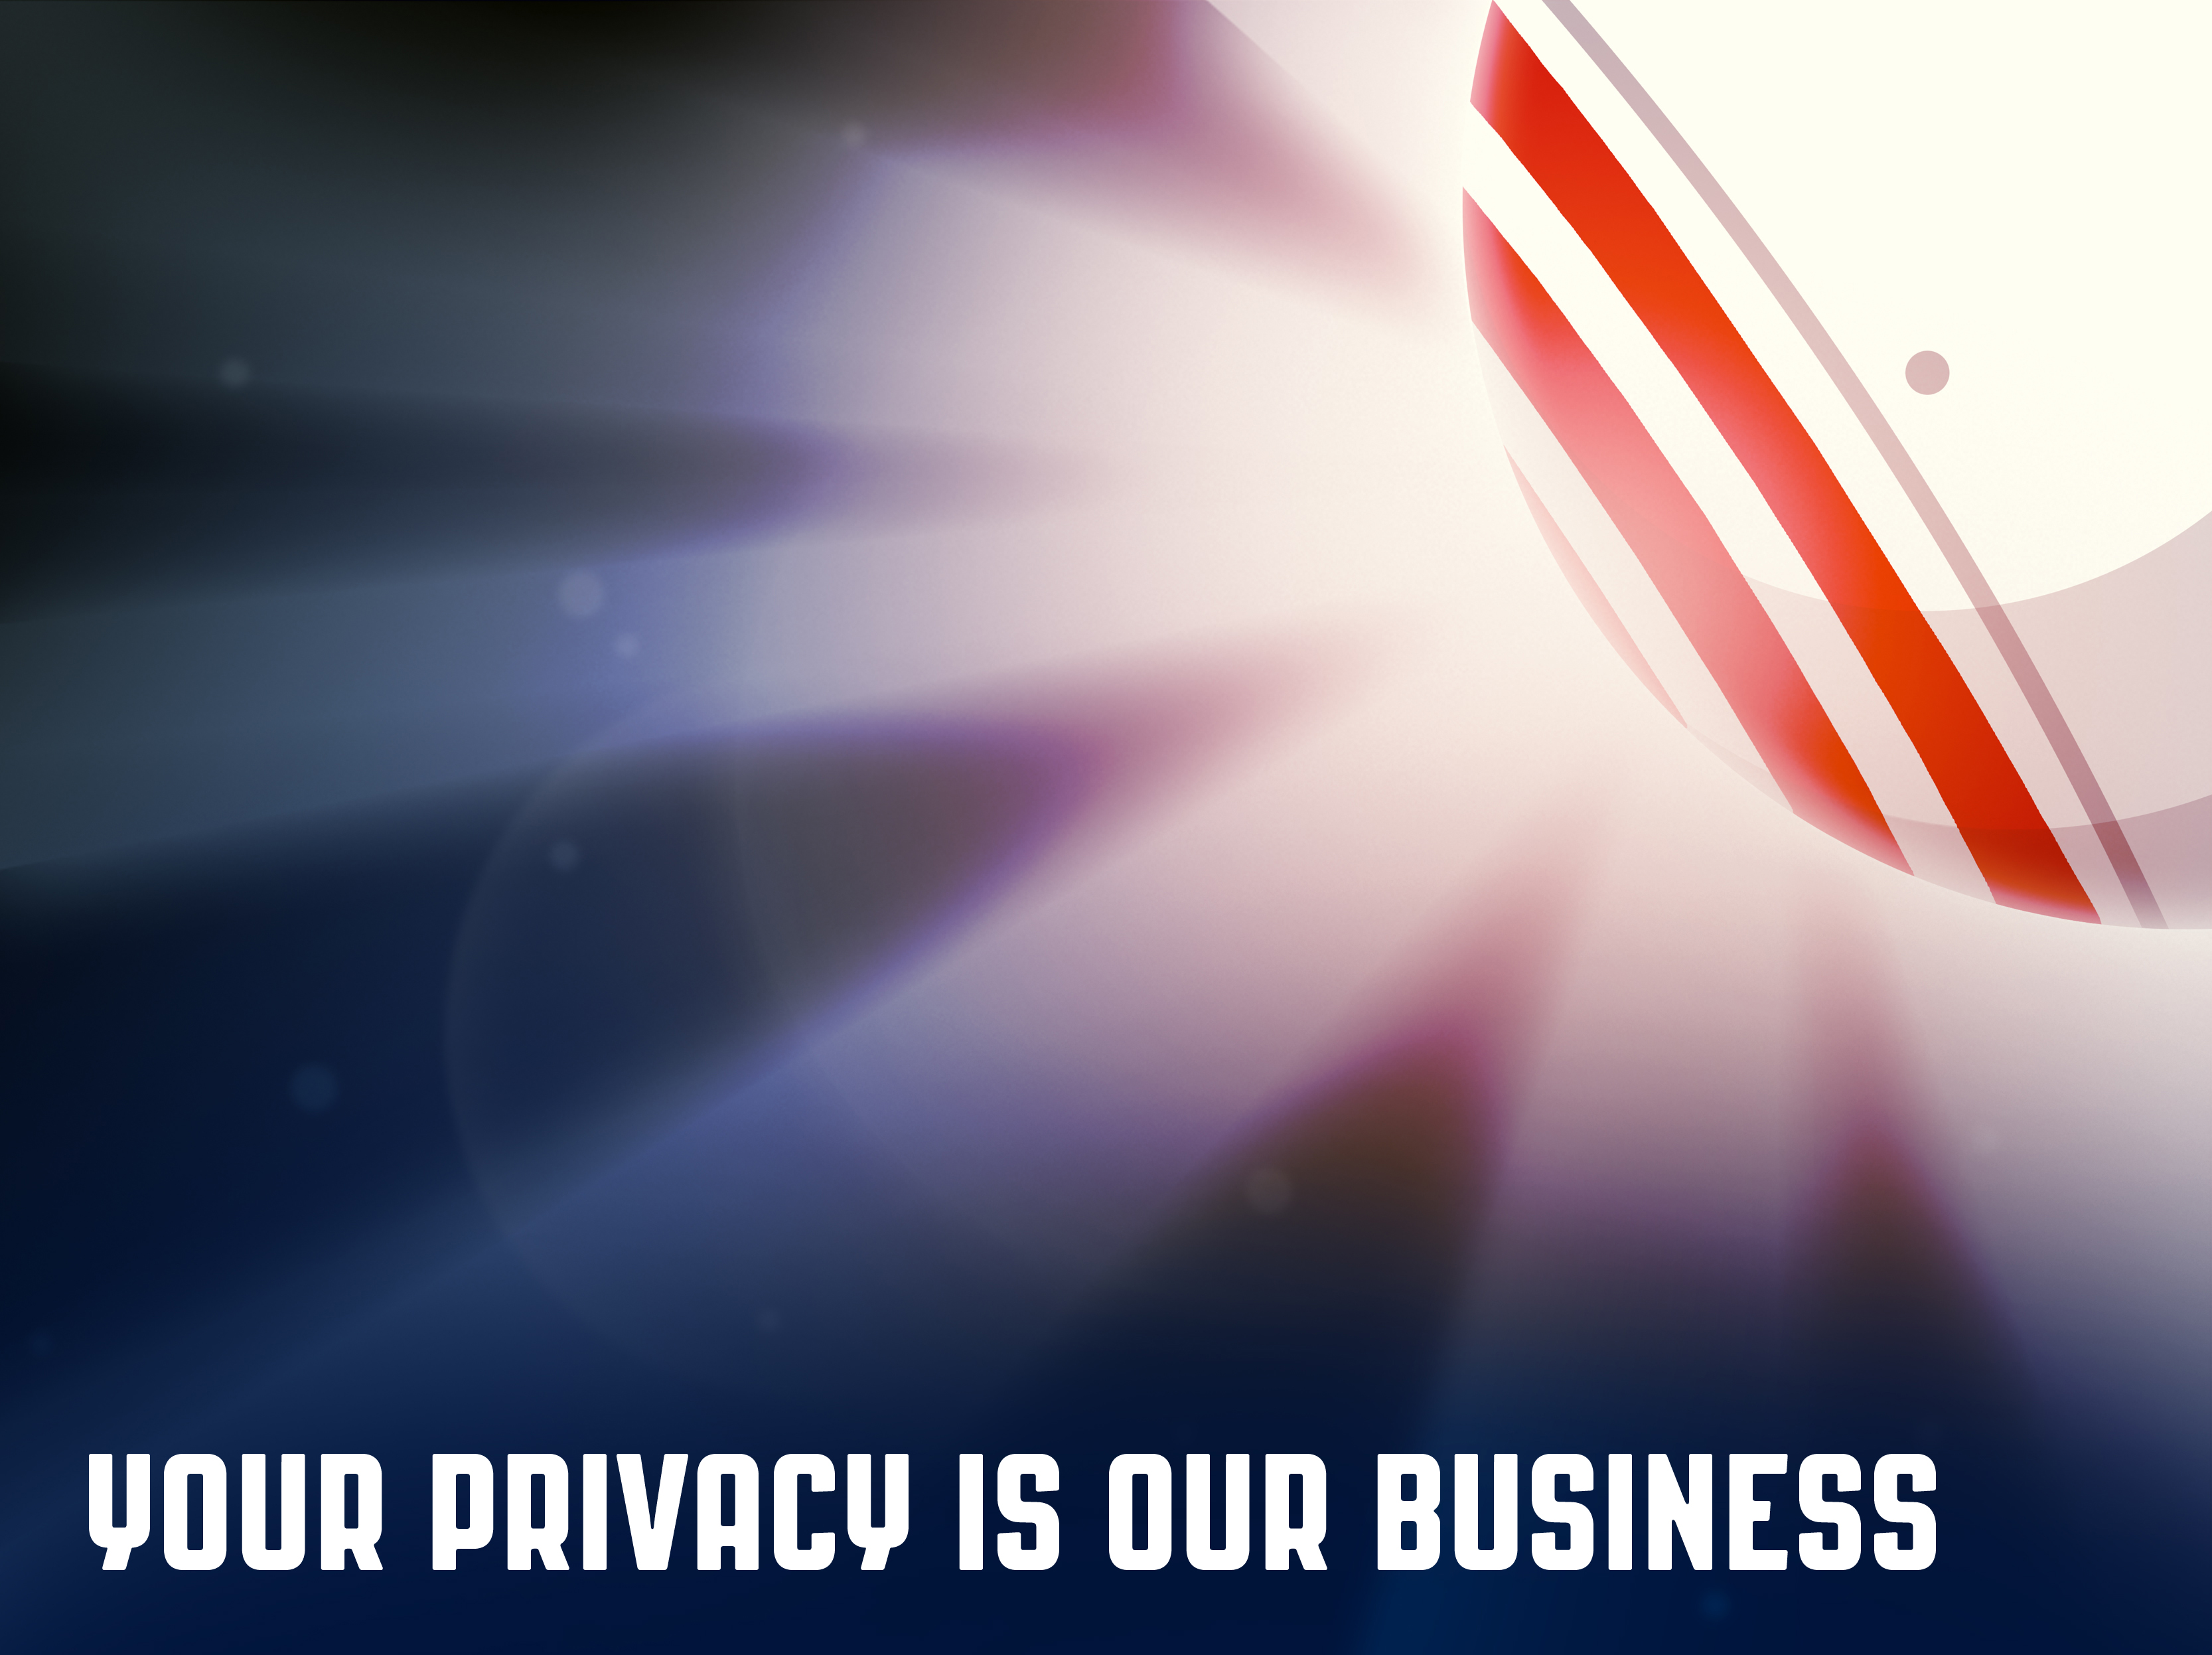 Your privacy is our business